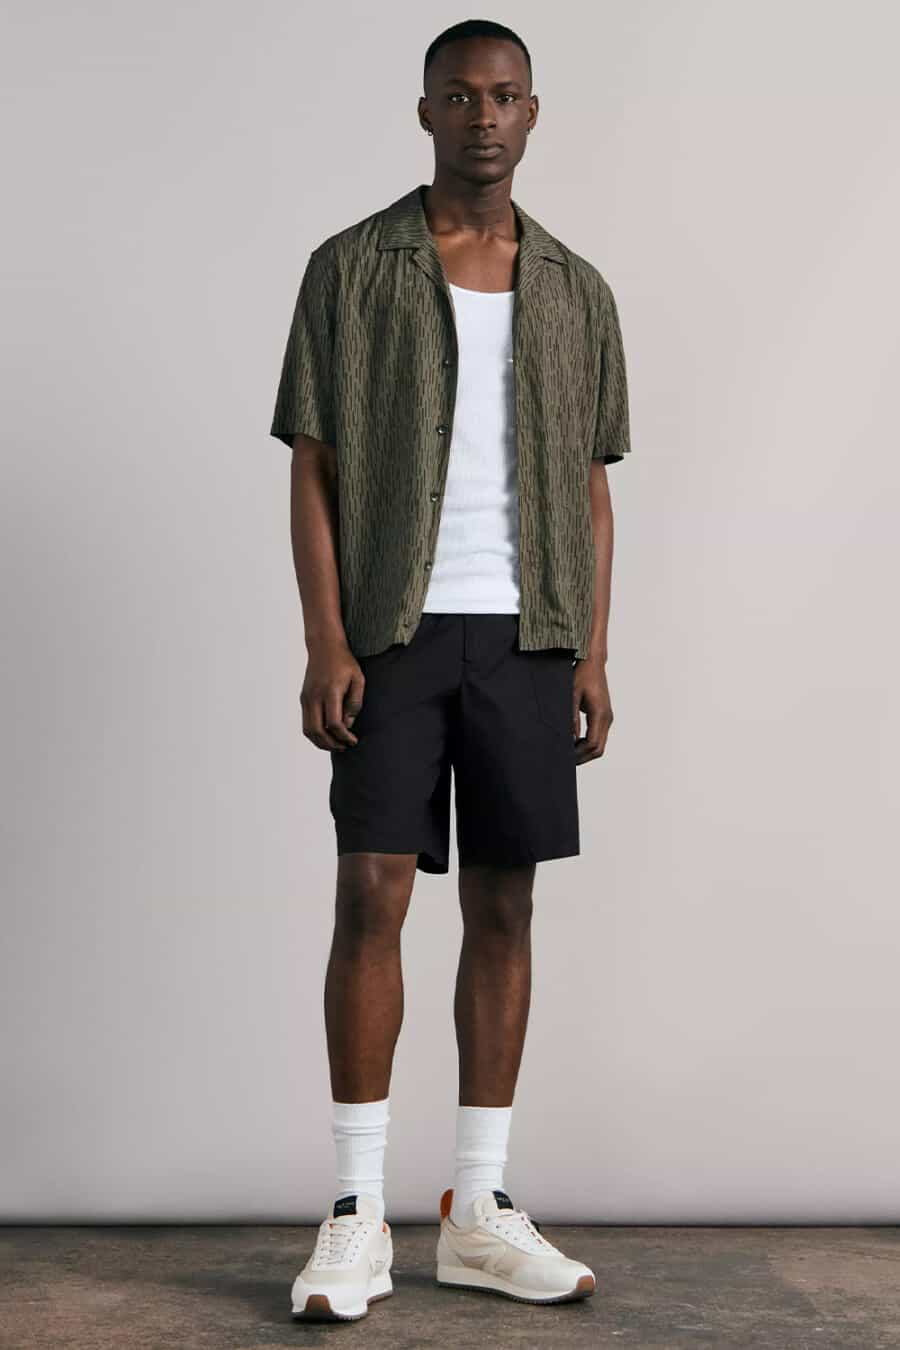 Men's black cotton shorts, white tank top vest, white tube socks, cream running sneakers and printed green Cuban collar shirt outfit